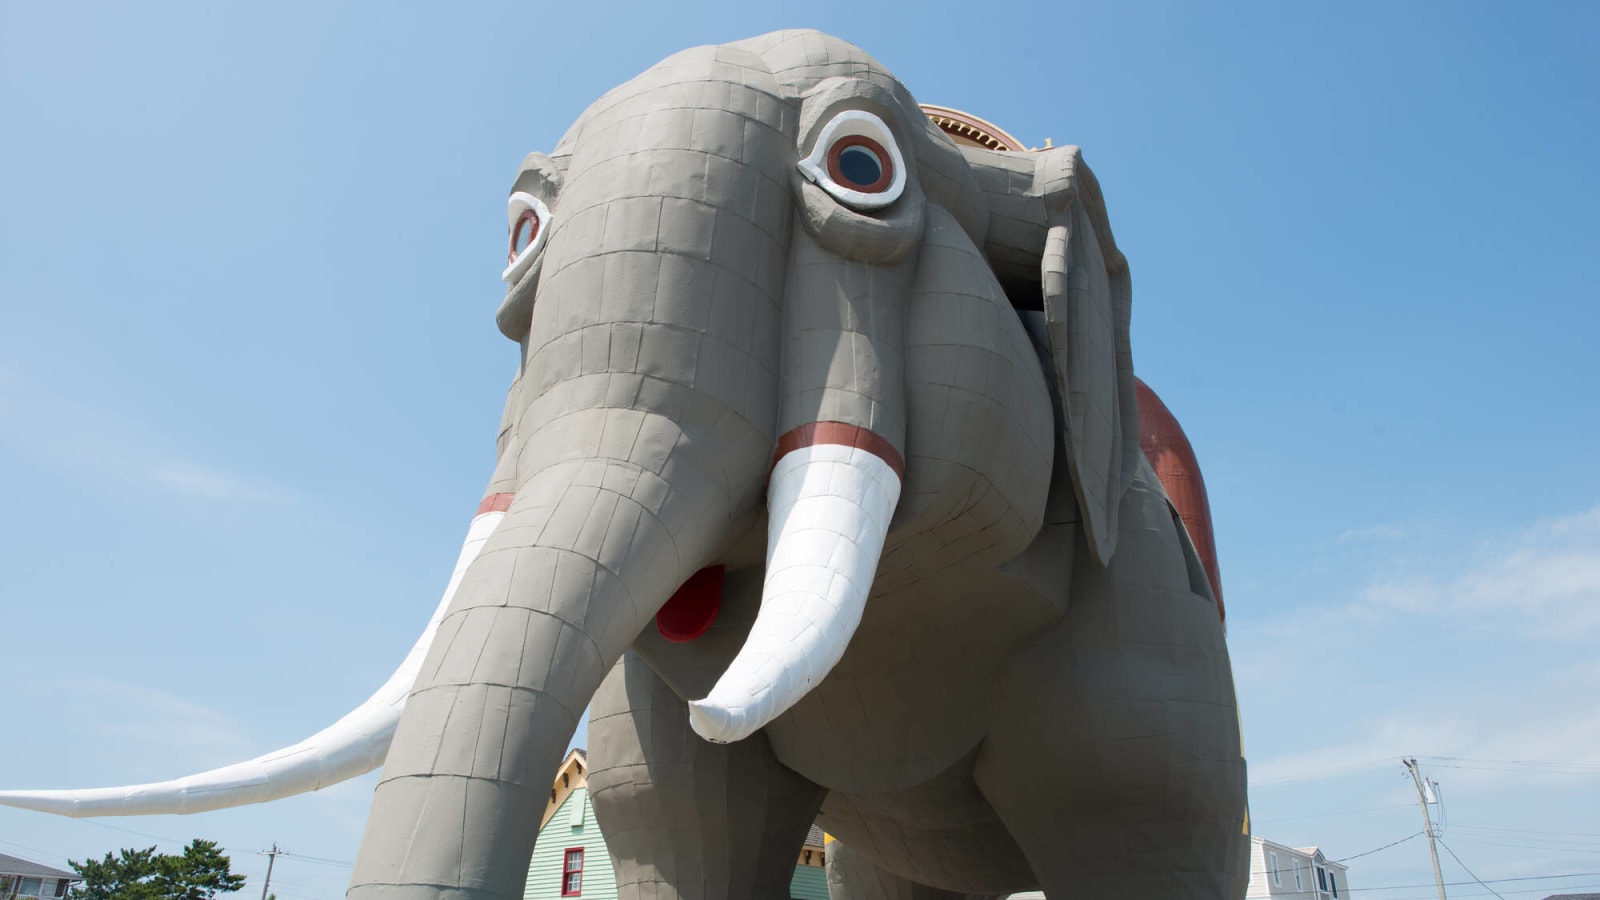 15 weird & wonderful roadside attractions in the United States